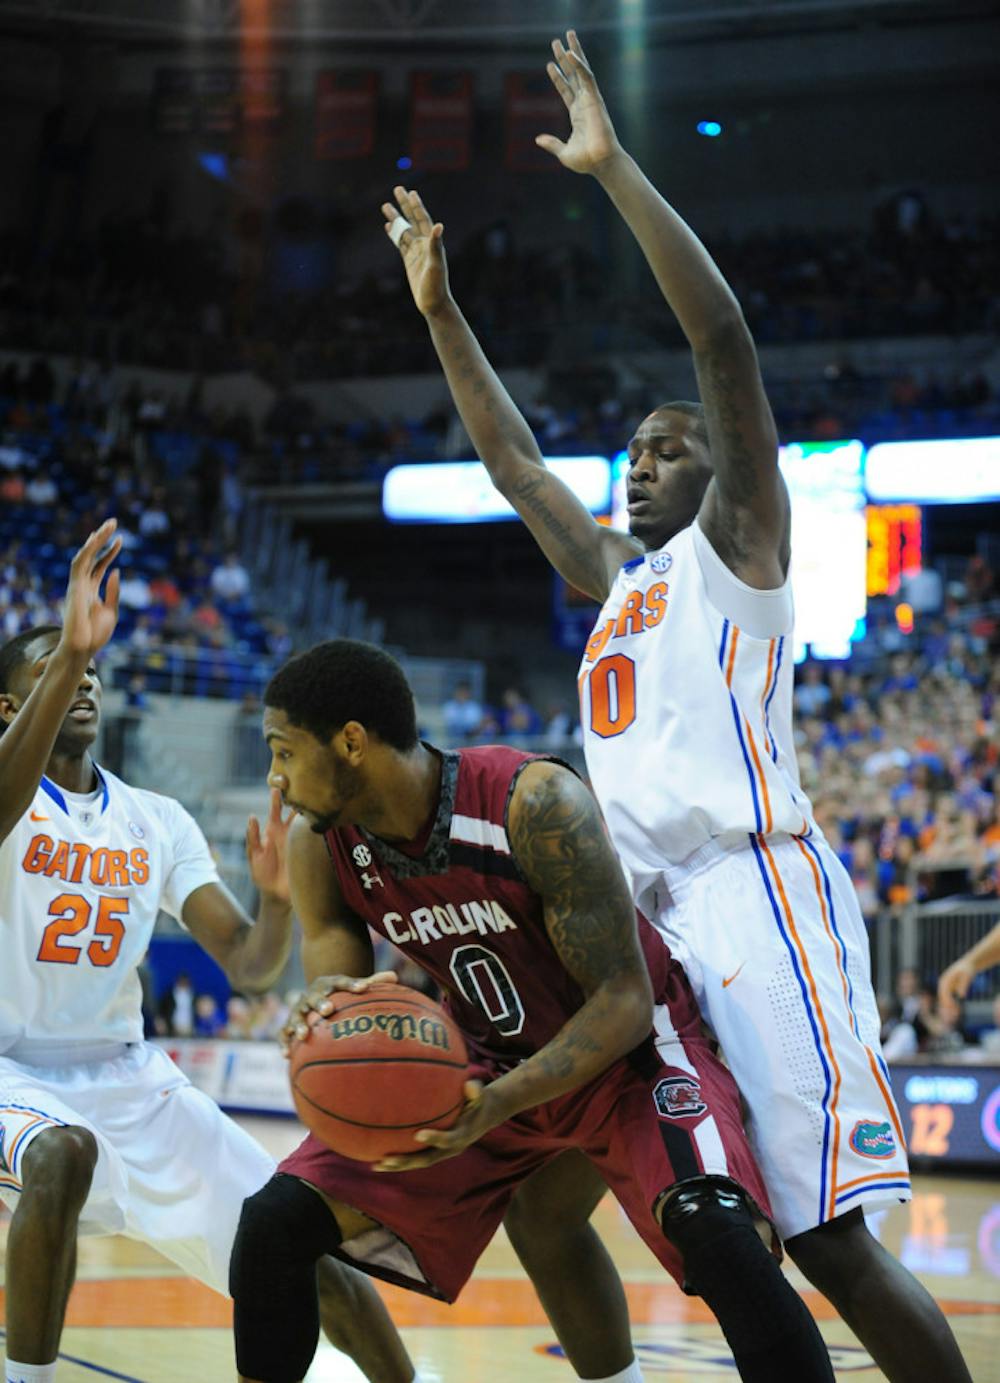 <p>Dorian Finney-Smith (right) defends USC’s Sindarius Thornwell (middle) during Florida’s’ 74-58 win on Jan. 8 in the O’Connell Center. Finney-Smith led UF in points in its win against Arkansas on Saturday.</p>